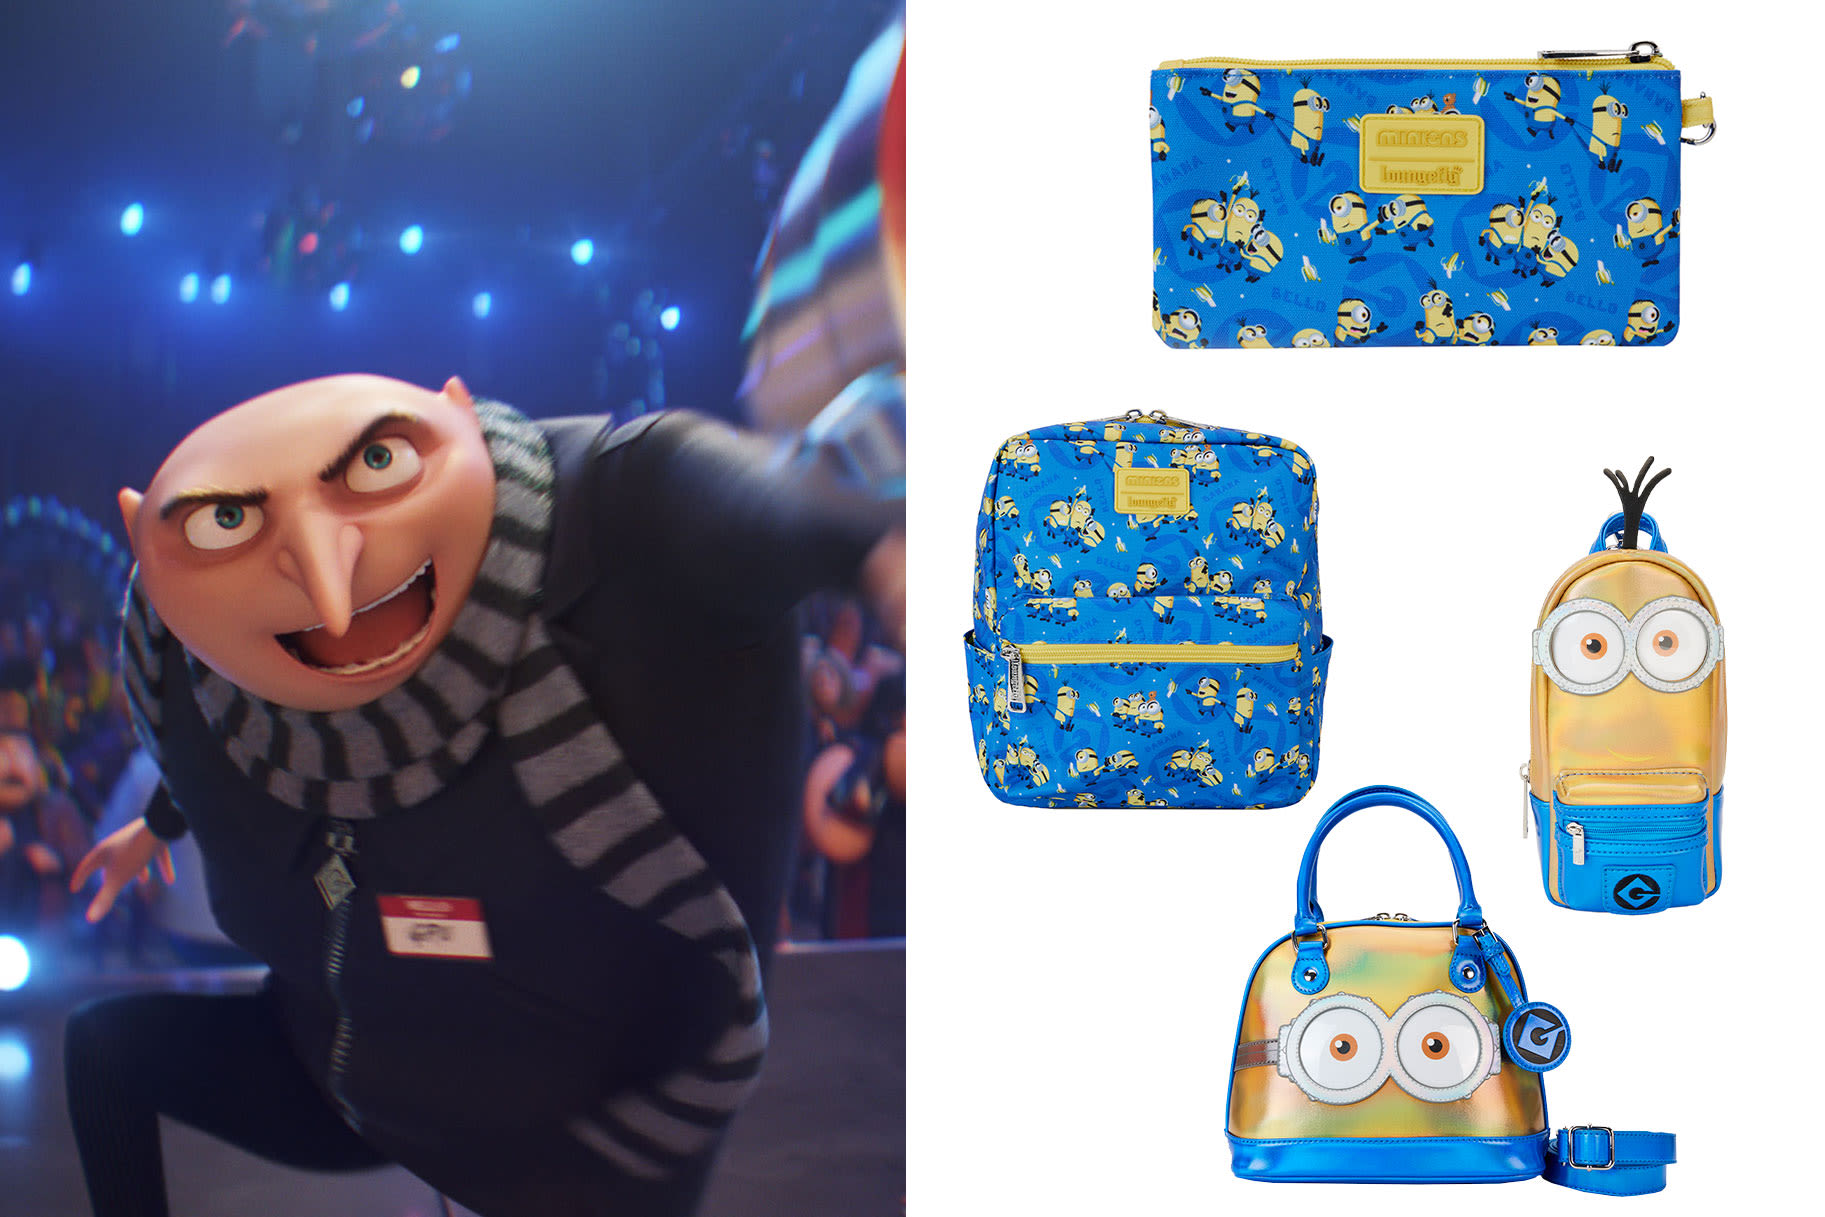 Dress Like a Minion with Loungefly's Despicable Me 4 Apparel Collection (Exclusive)